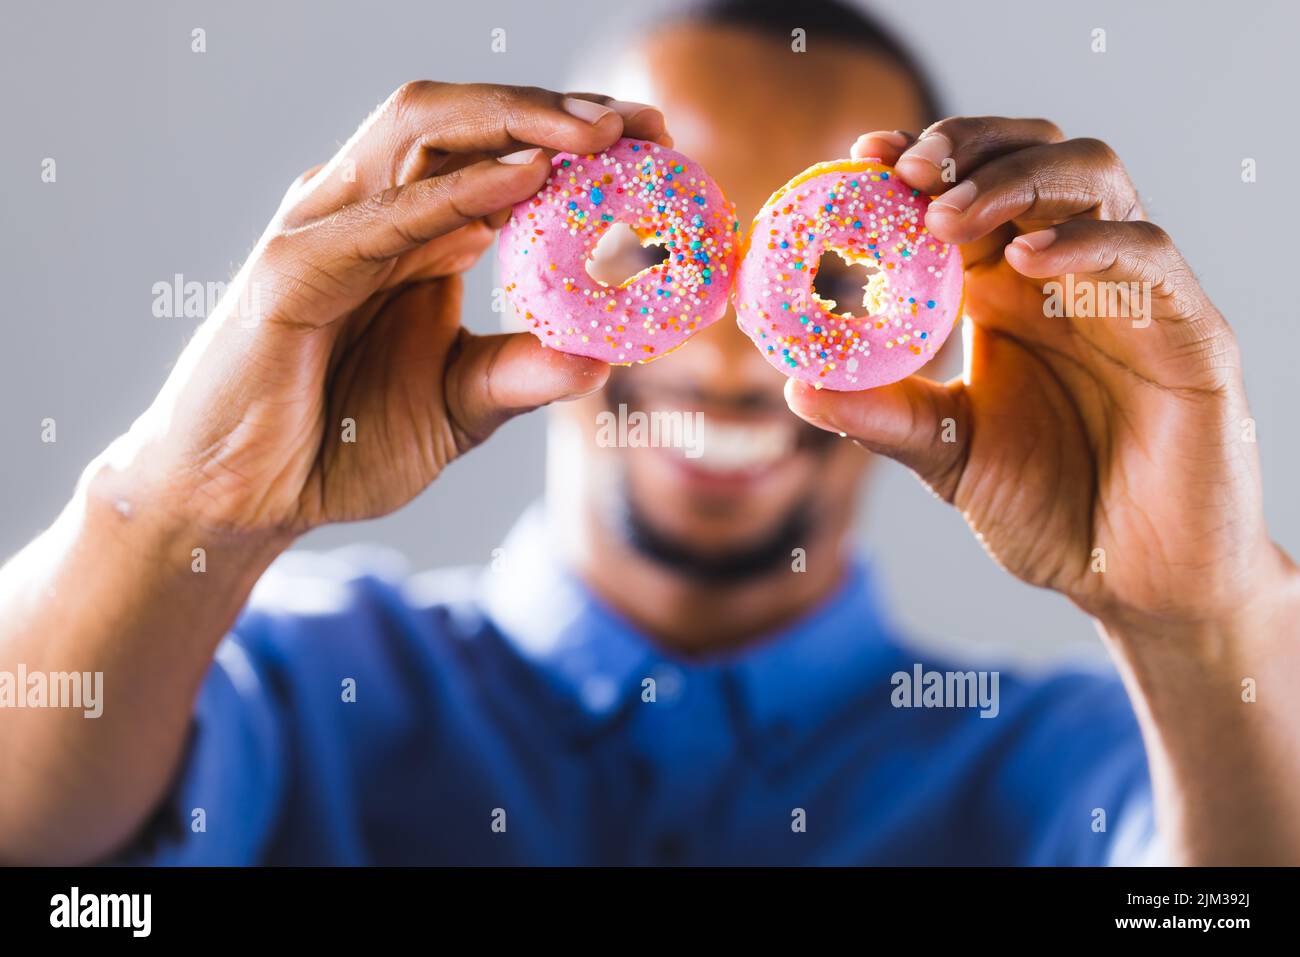 Smiling african american man holding fresh pink donuts in front of face against gray background Stock Photo